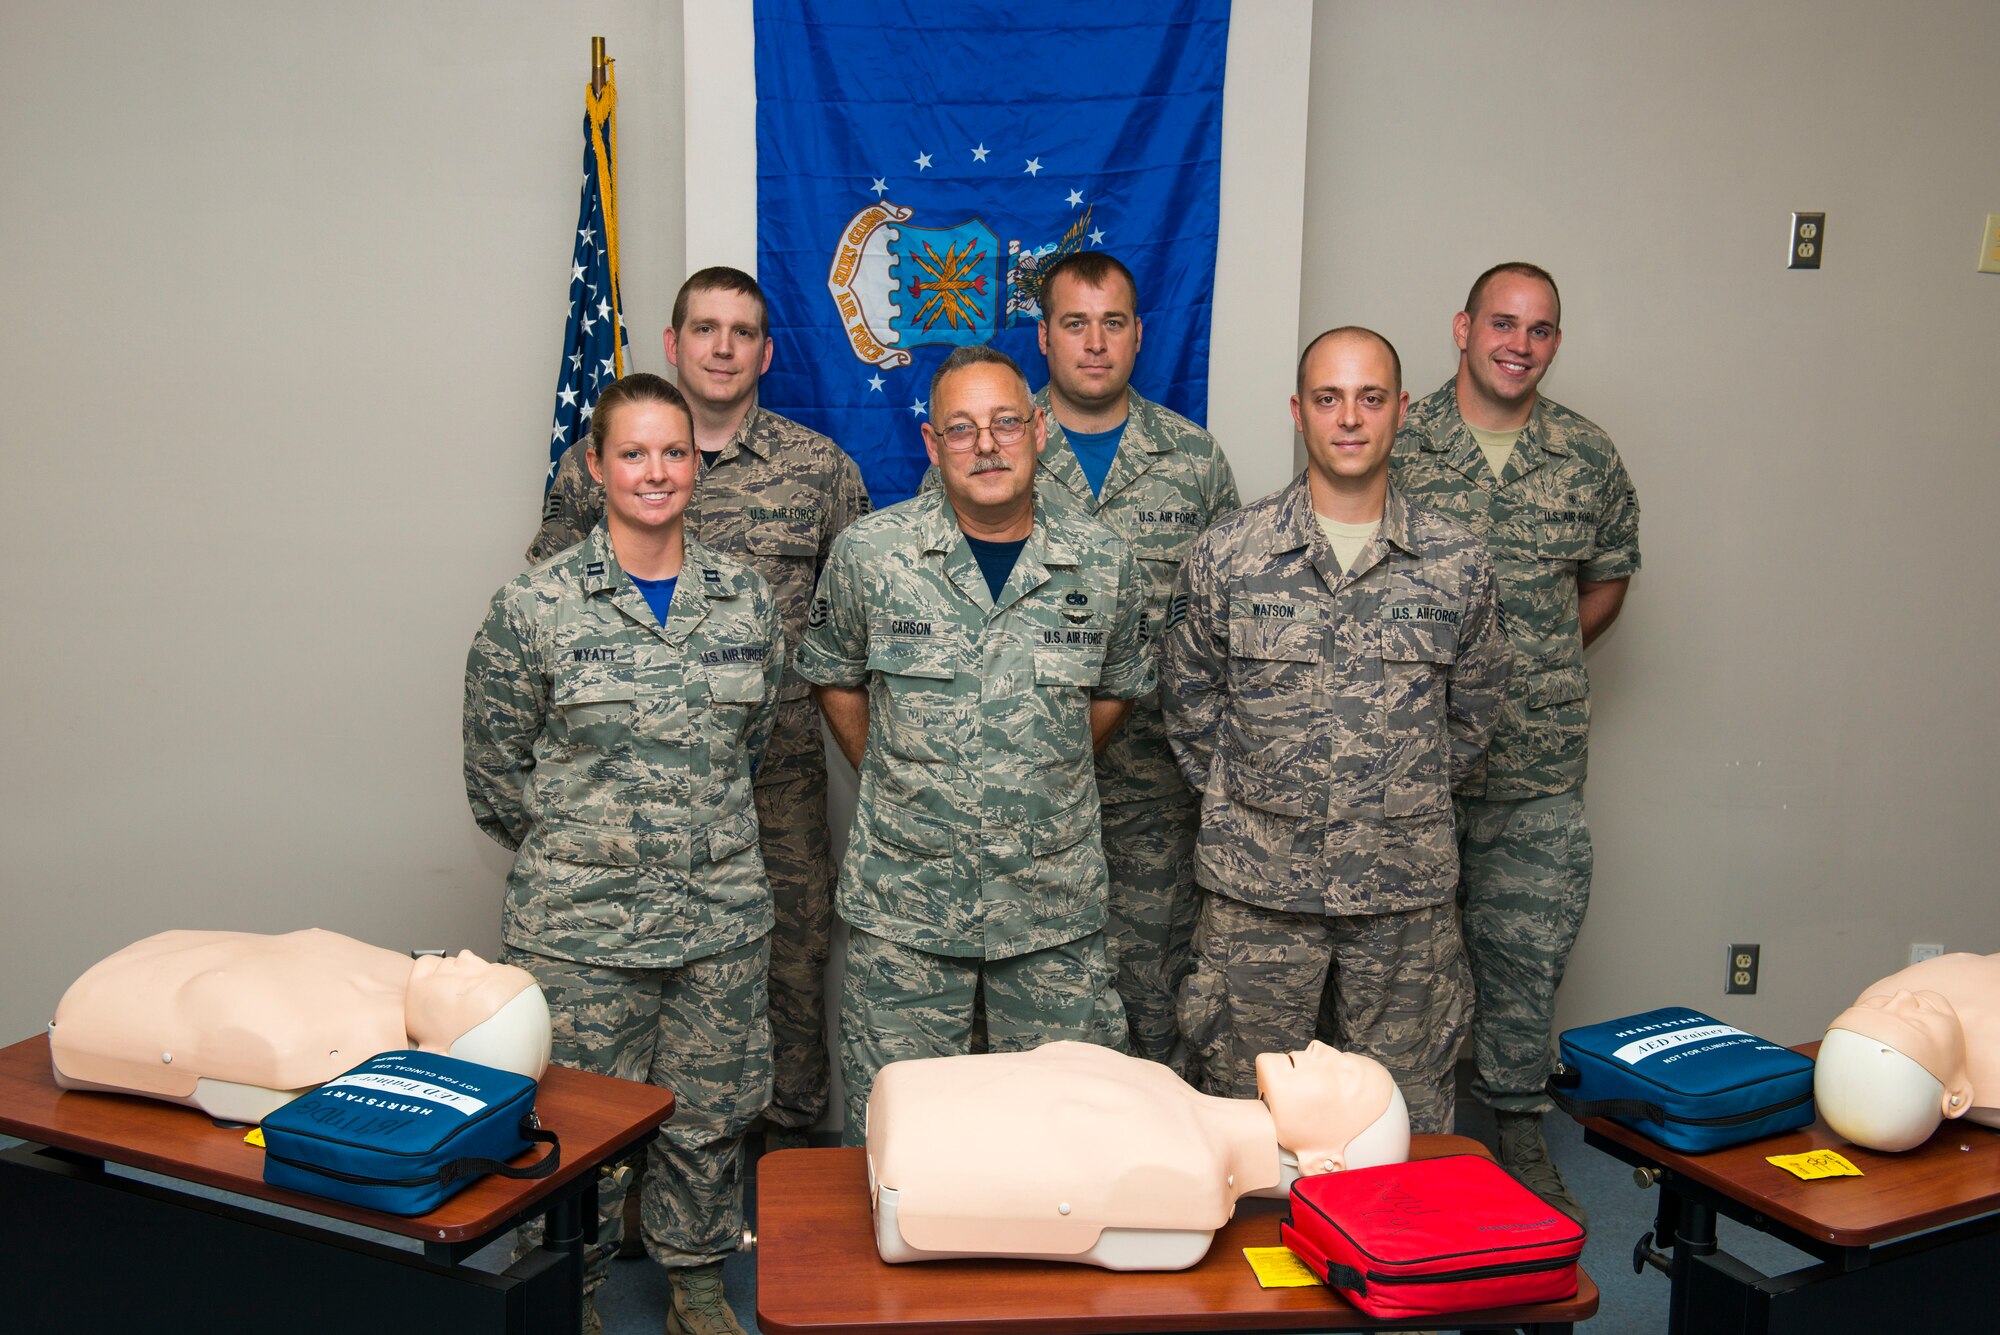 Three members of the 167th Airlift Wing in Martinsburg, W.Va., stand by instructors that taught them CPR, Aug. 6, 2016. Back L-R: Staff Sgt. Johnathen Guzik, a member of metals technology at the 167th, Staff Sgt. Justin Bird and Senior Airman Travis Sites, both CPR instructors at the 167th. Front L-R: Capt. Lori Wyatt, CPR instructor at the 167th, Staff Sgt. John Carson, a crew chief at the 167th, and Staff Sgt. Justin Watson a member of metals technology at the 167th. Guzik, Carson and Watson performed CPR on victims of a crash on I-81 after leaving drill on June 12, 2016. Wyatt, Bird and Sites instructed a CPR class that Guzik and Watson attended the day before. (U.S. National Guard photo by Staff Sgt. Jodie Witmer)